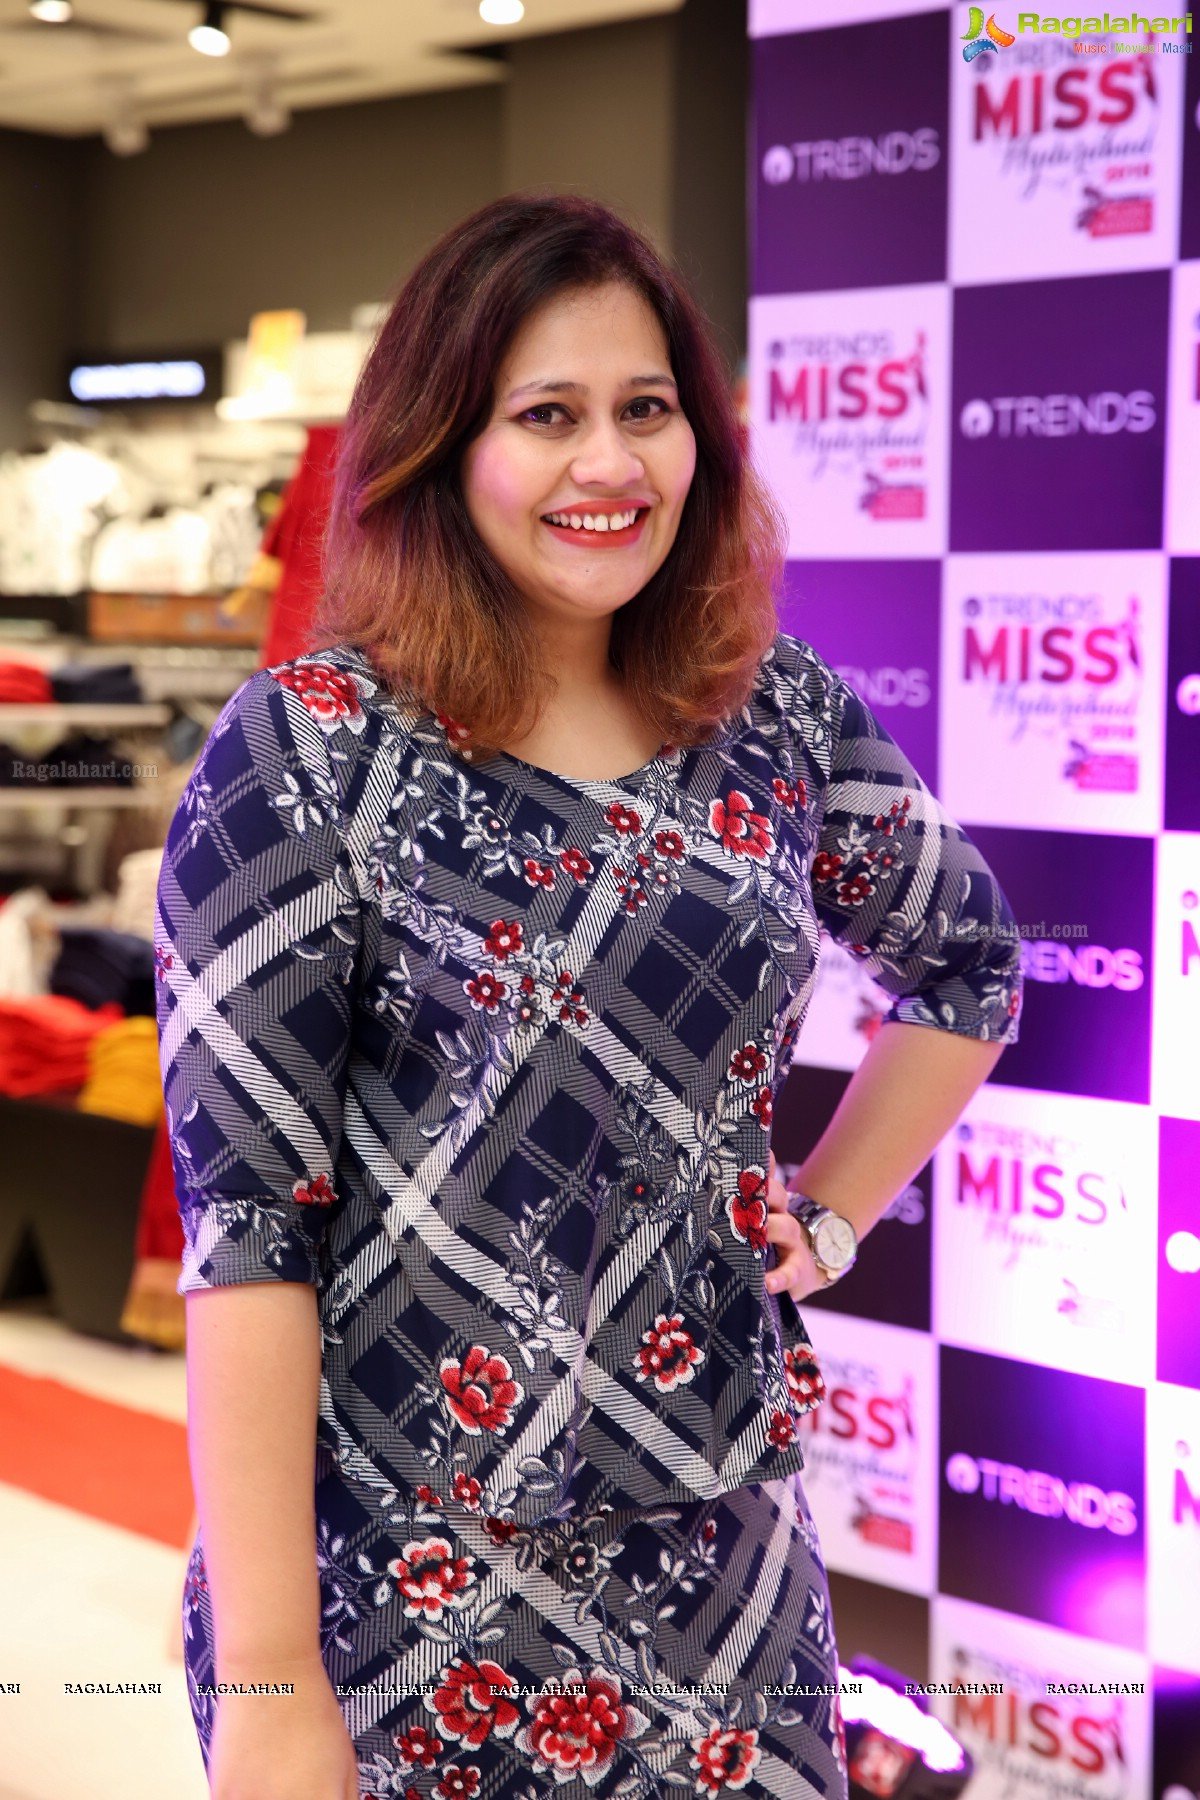 Reliance Trends Miss Hyderabad 2018 Announcement